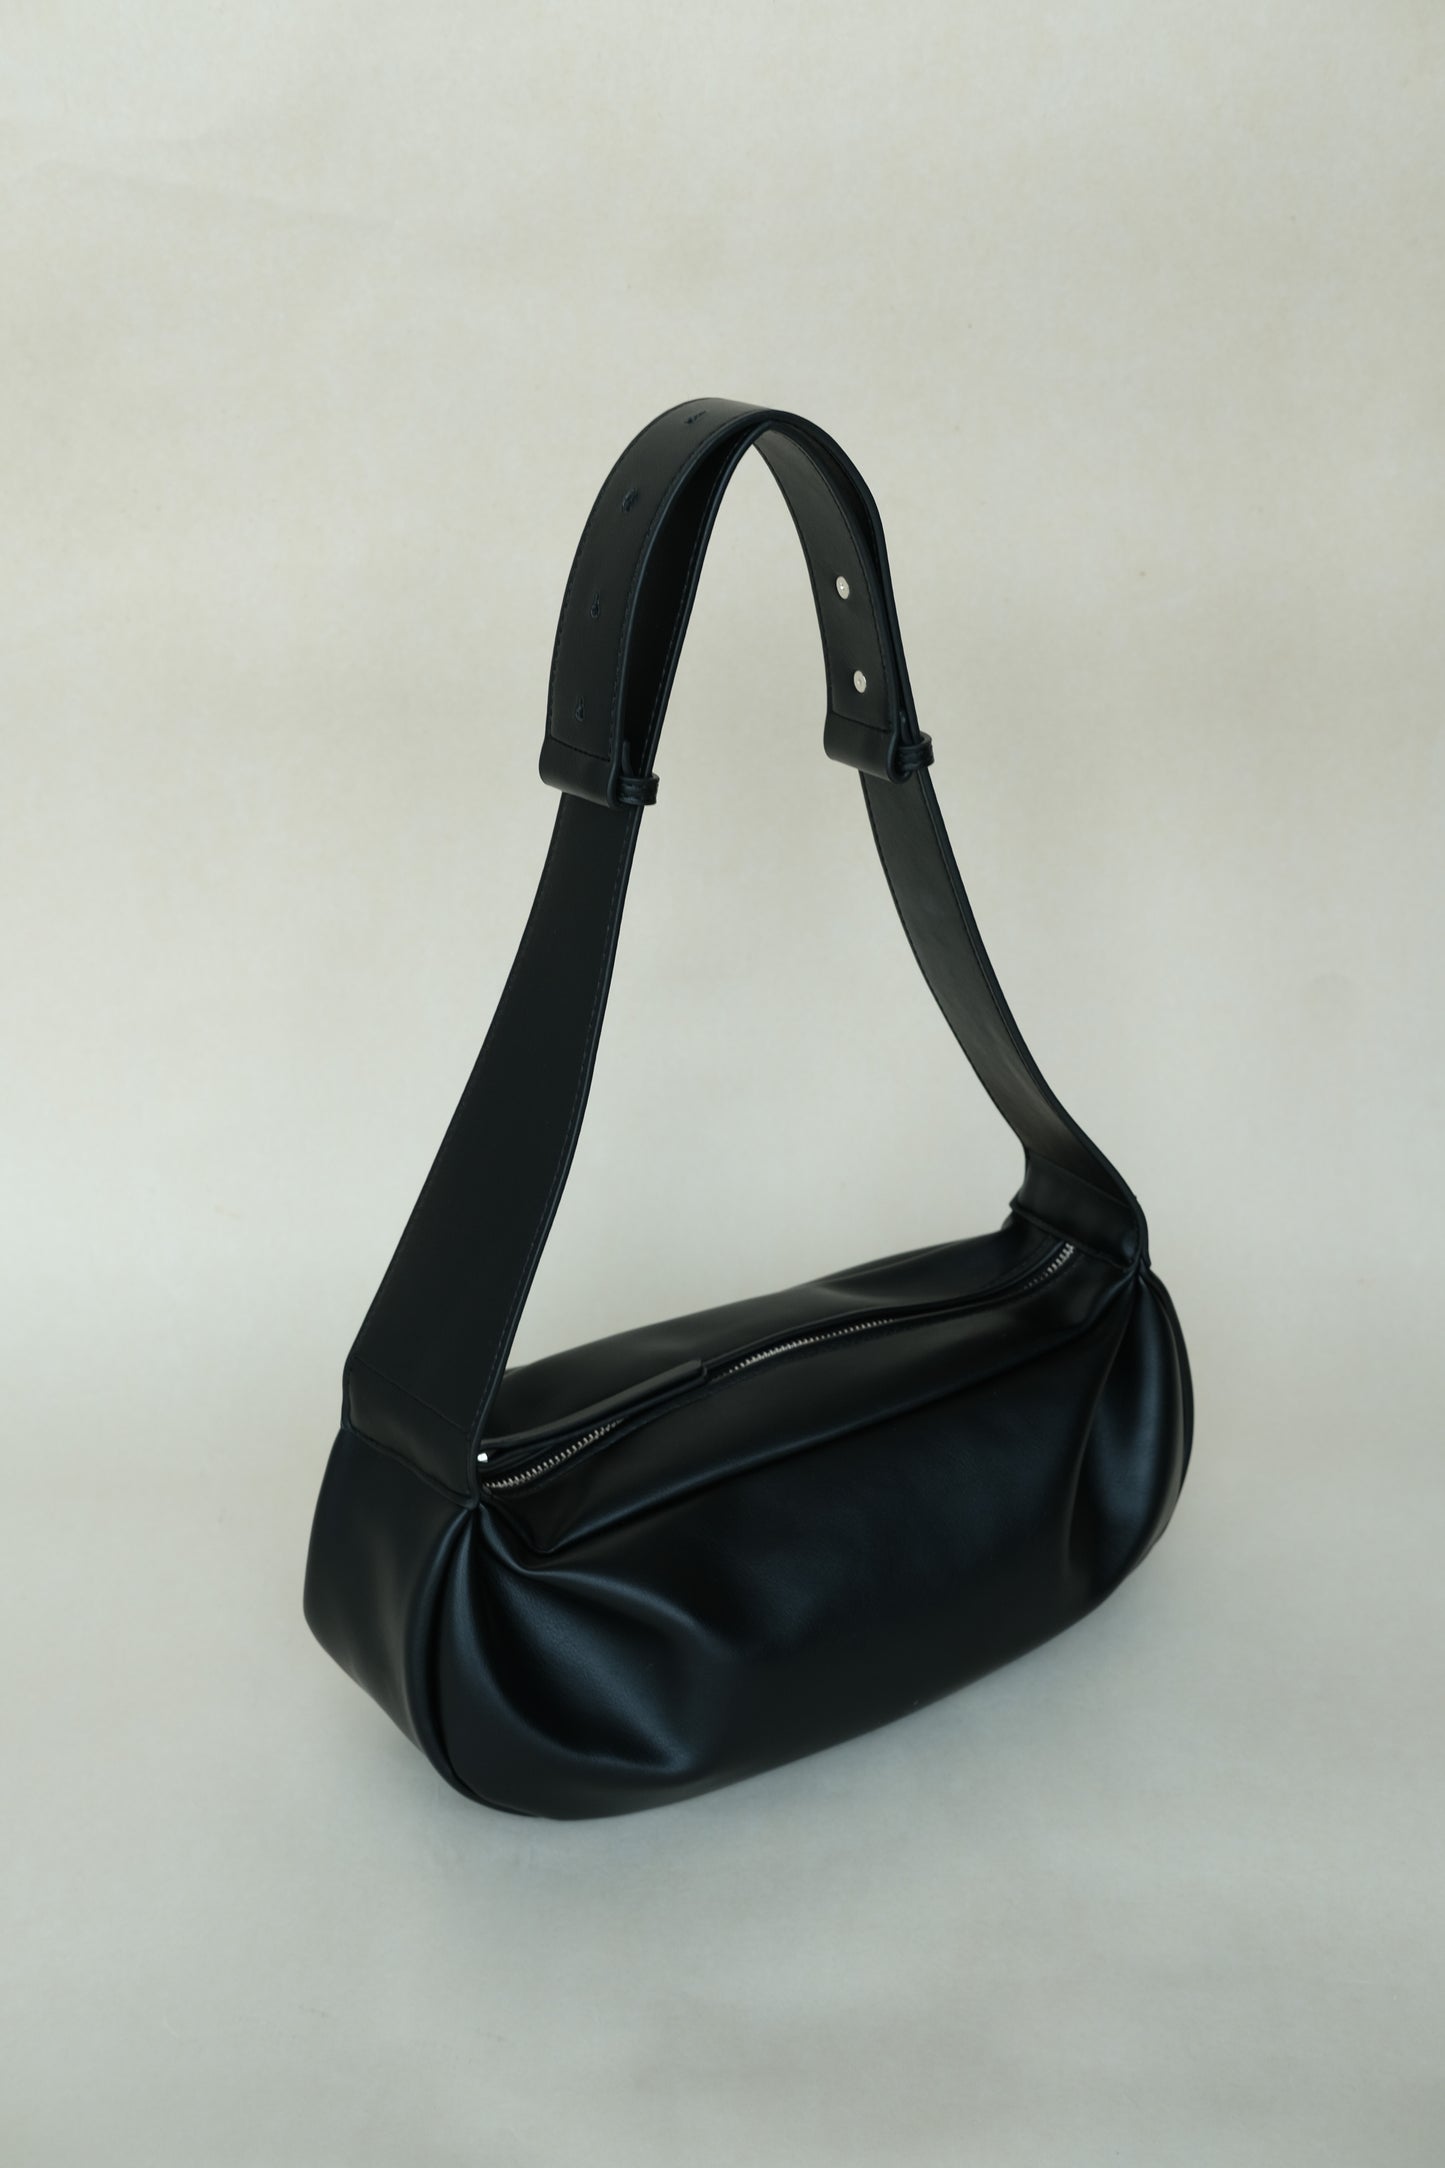 PU soft leather pillow bag in classic black